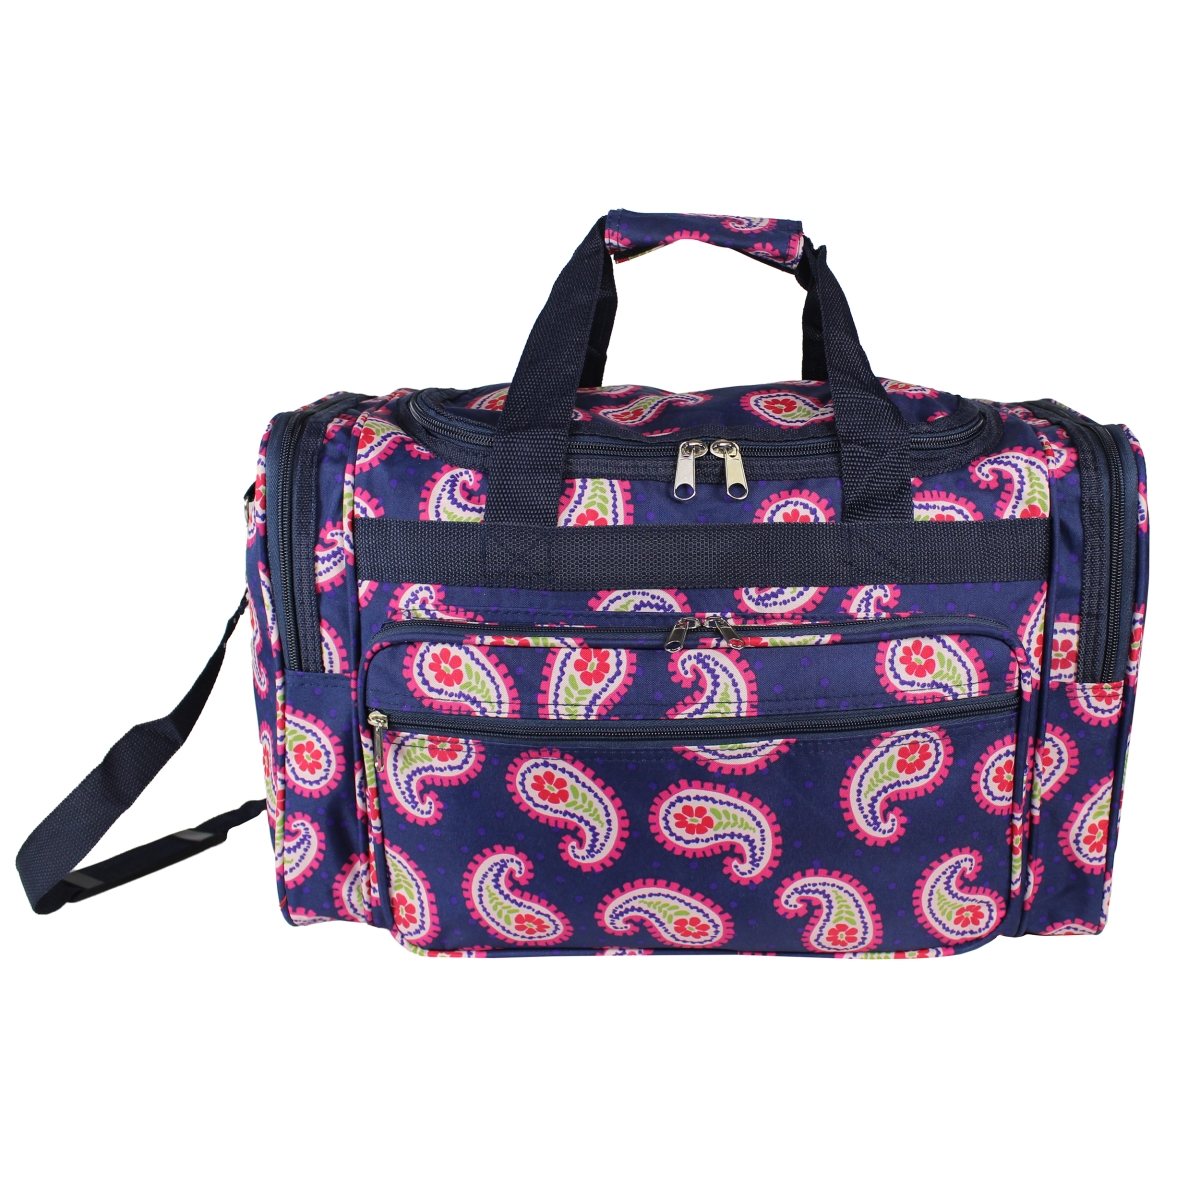 81t19-230 19 In. Carry-on Duffel Bag - Floral Paisley